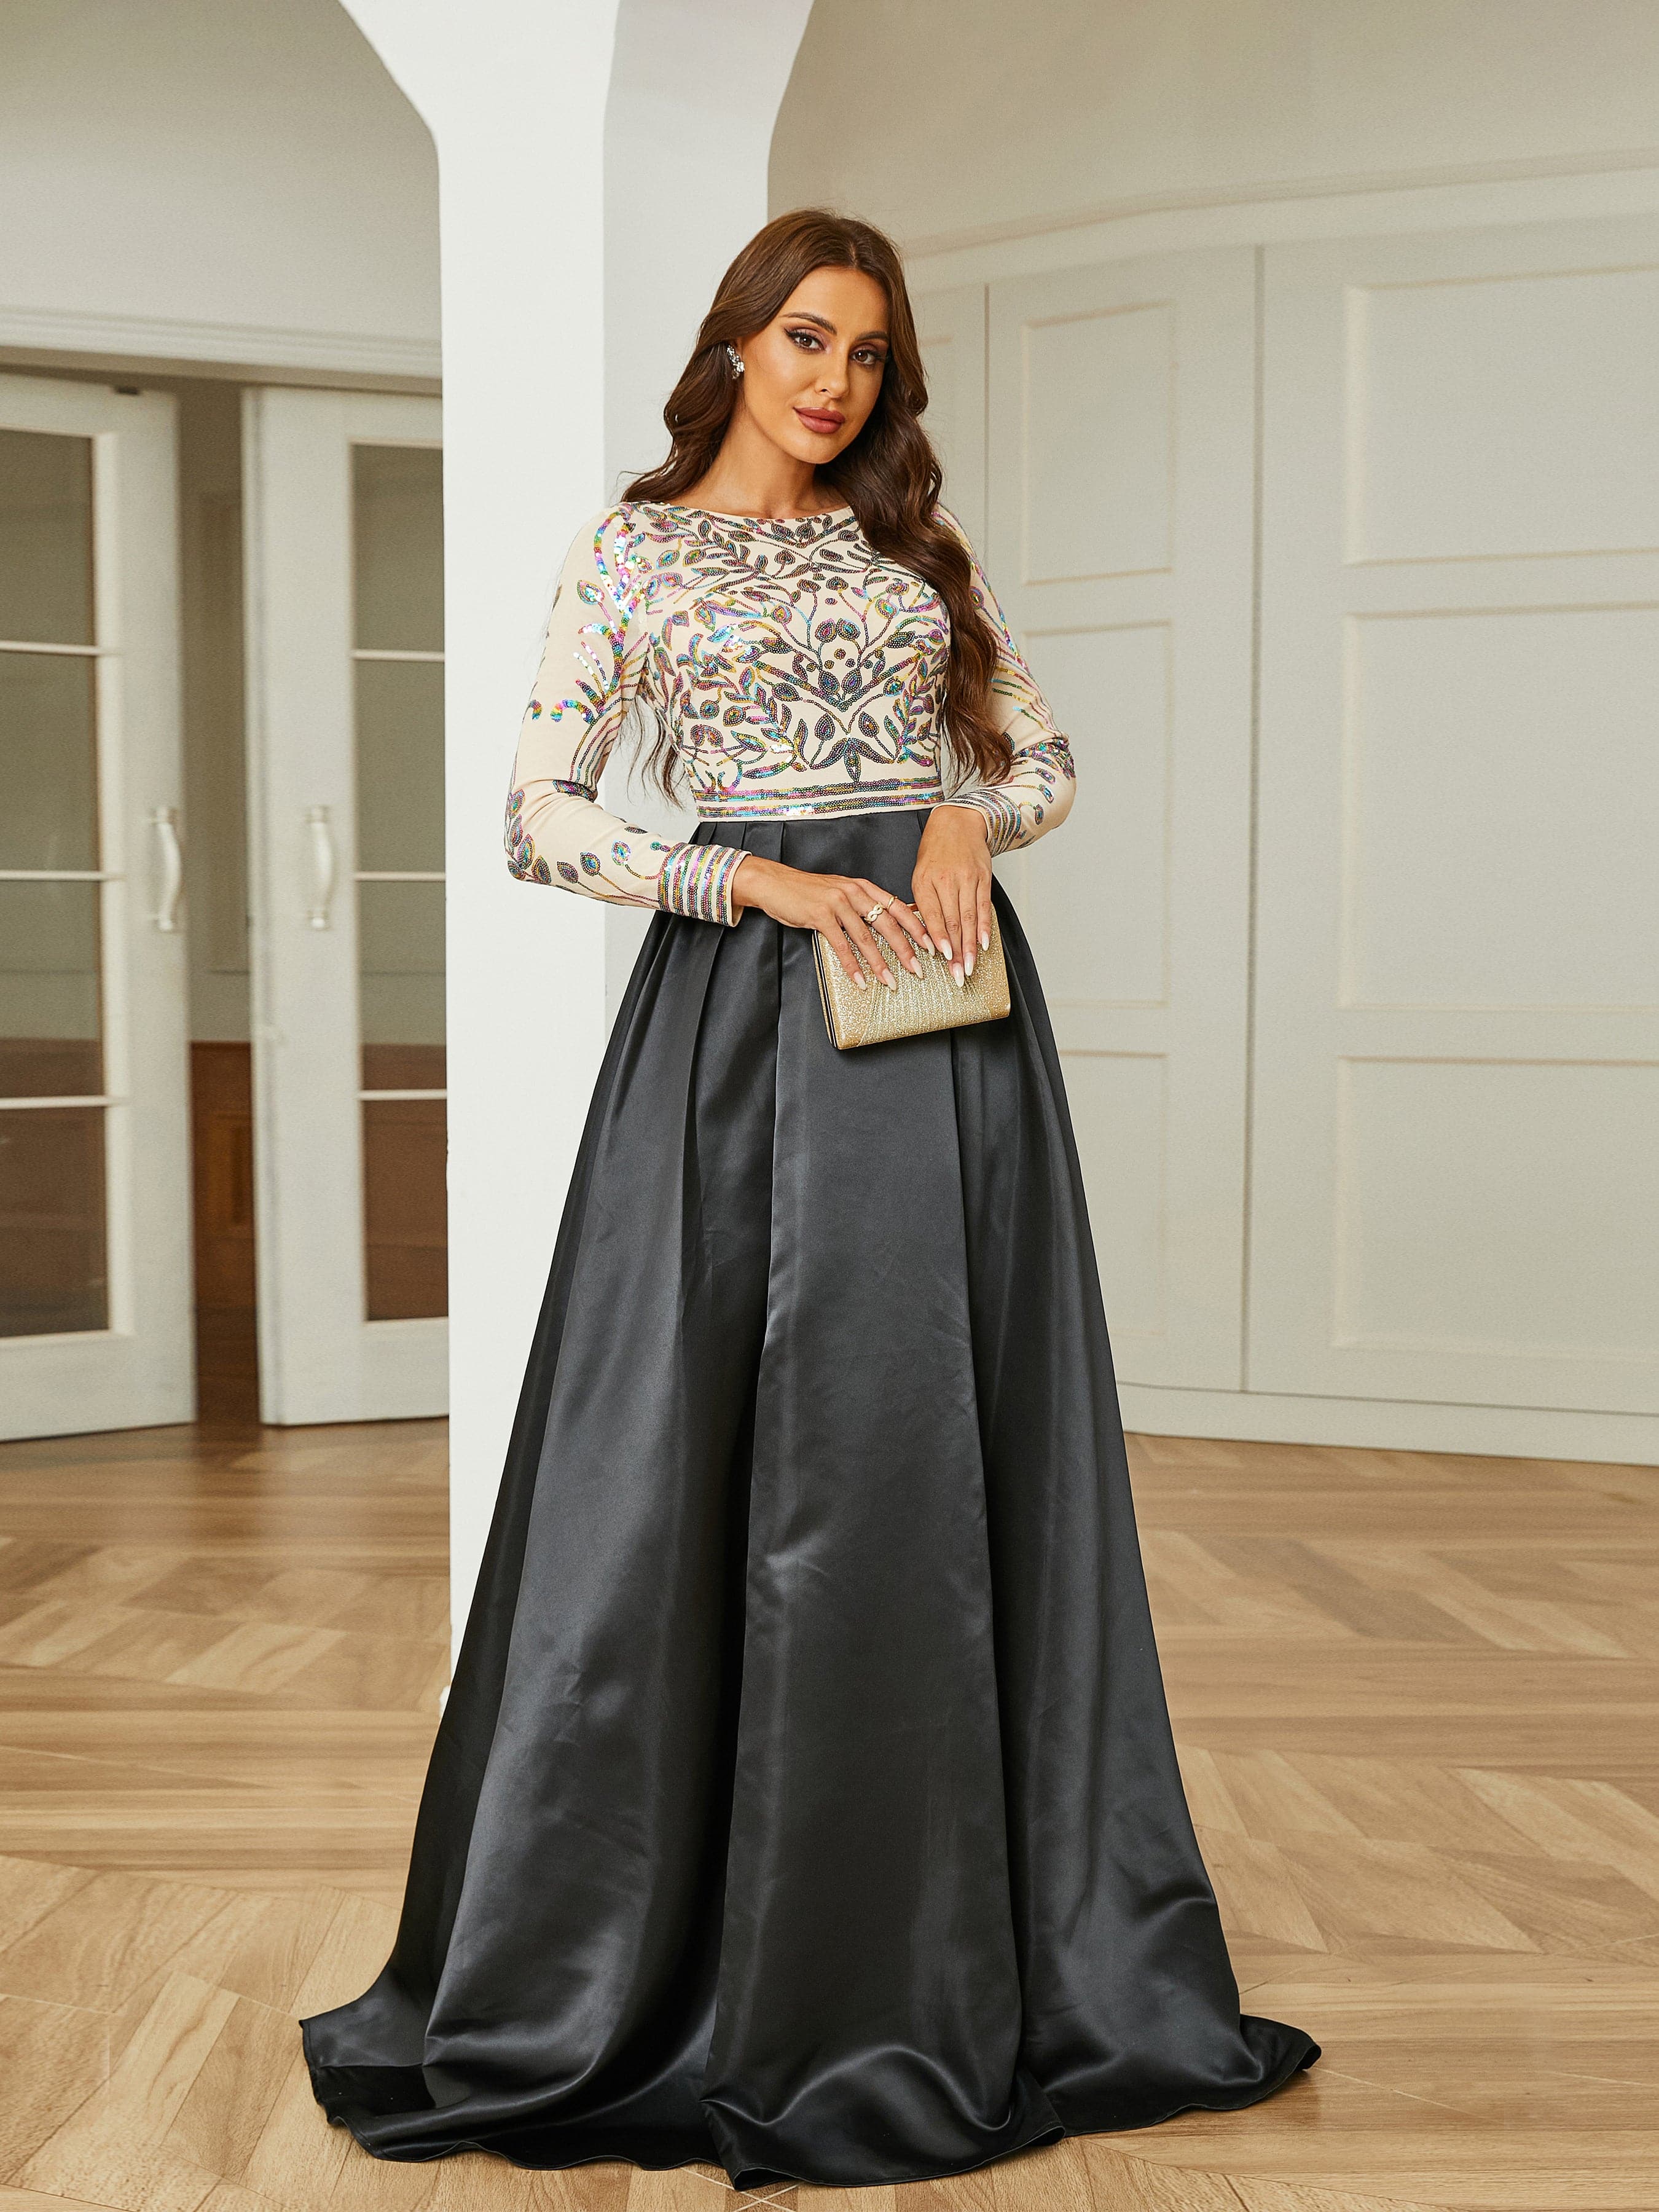 Formal A-Line Satin Panel Black Ball Gown RM20428